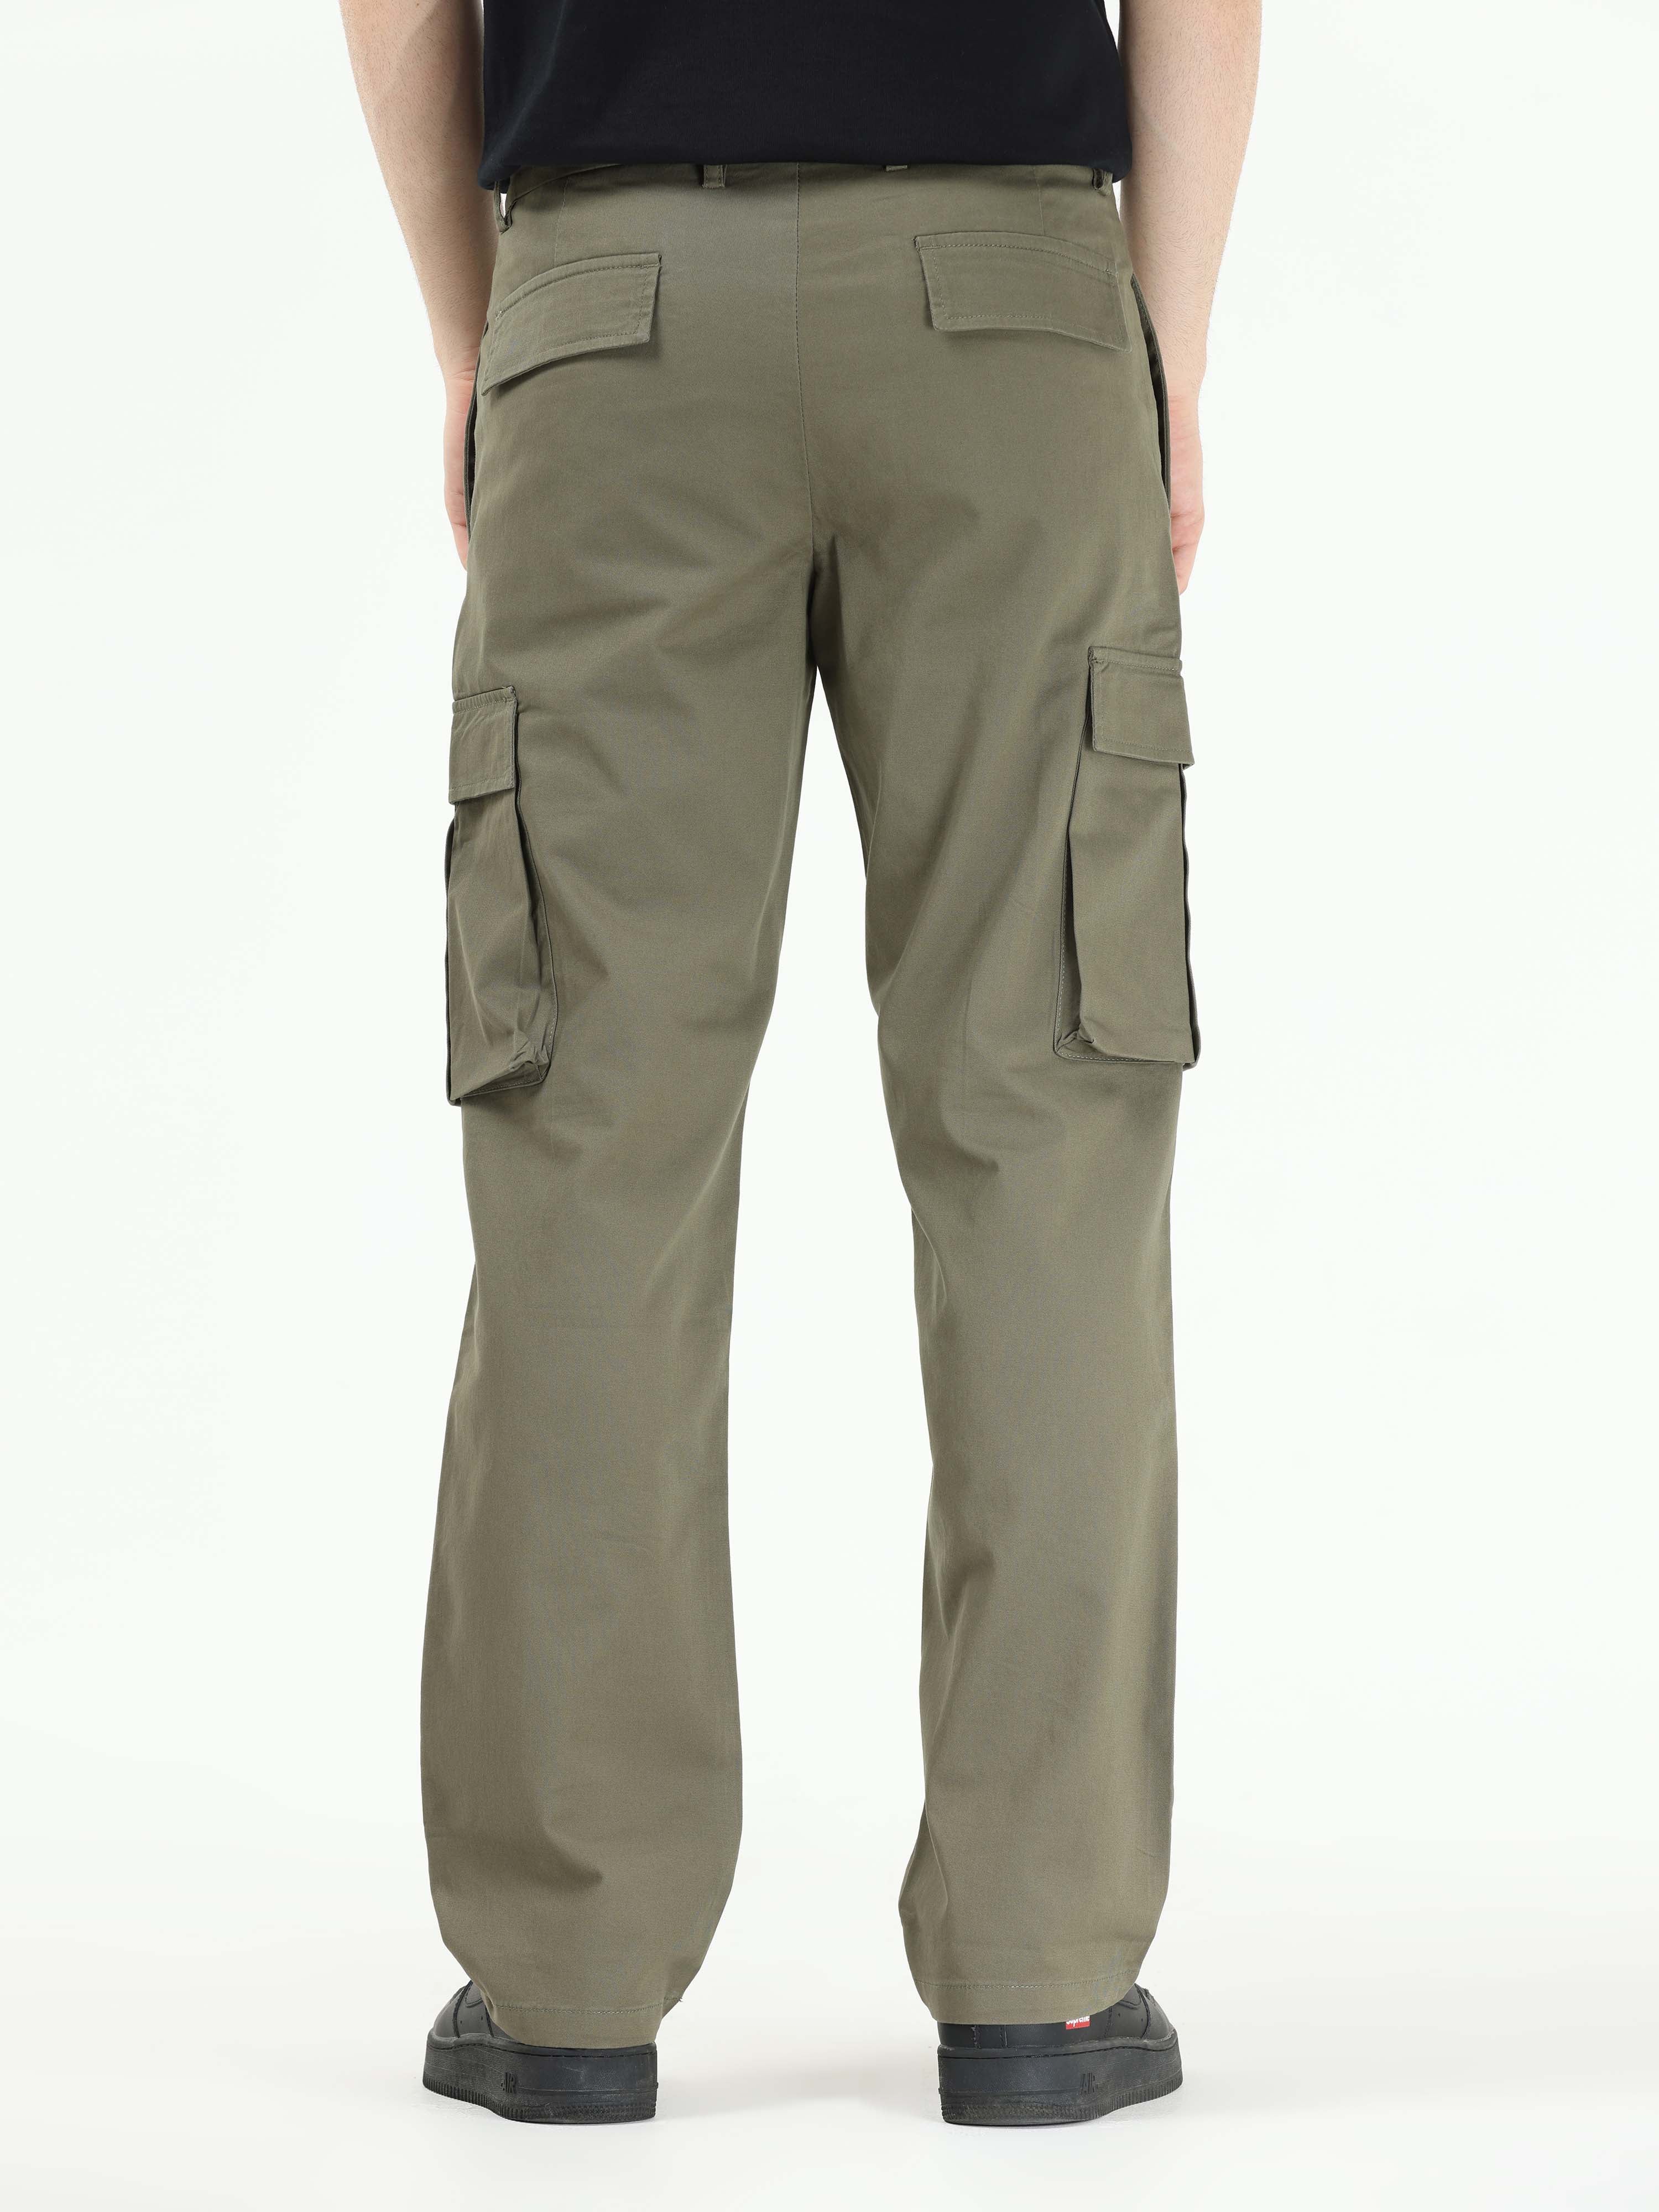 Olive Green Balloon Cargo Pants For Women - Shop the Latest Trend! -  Nolabels.in